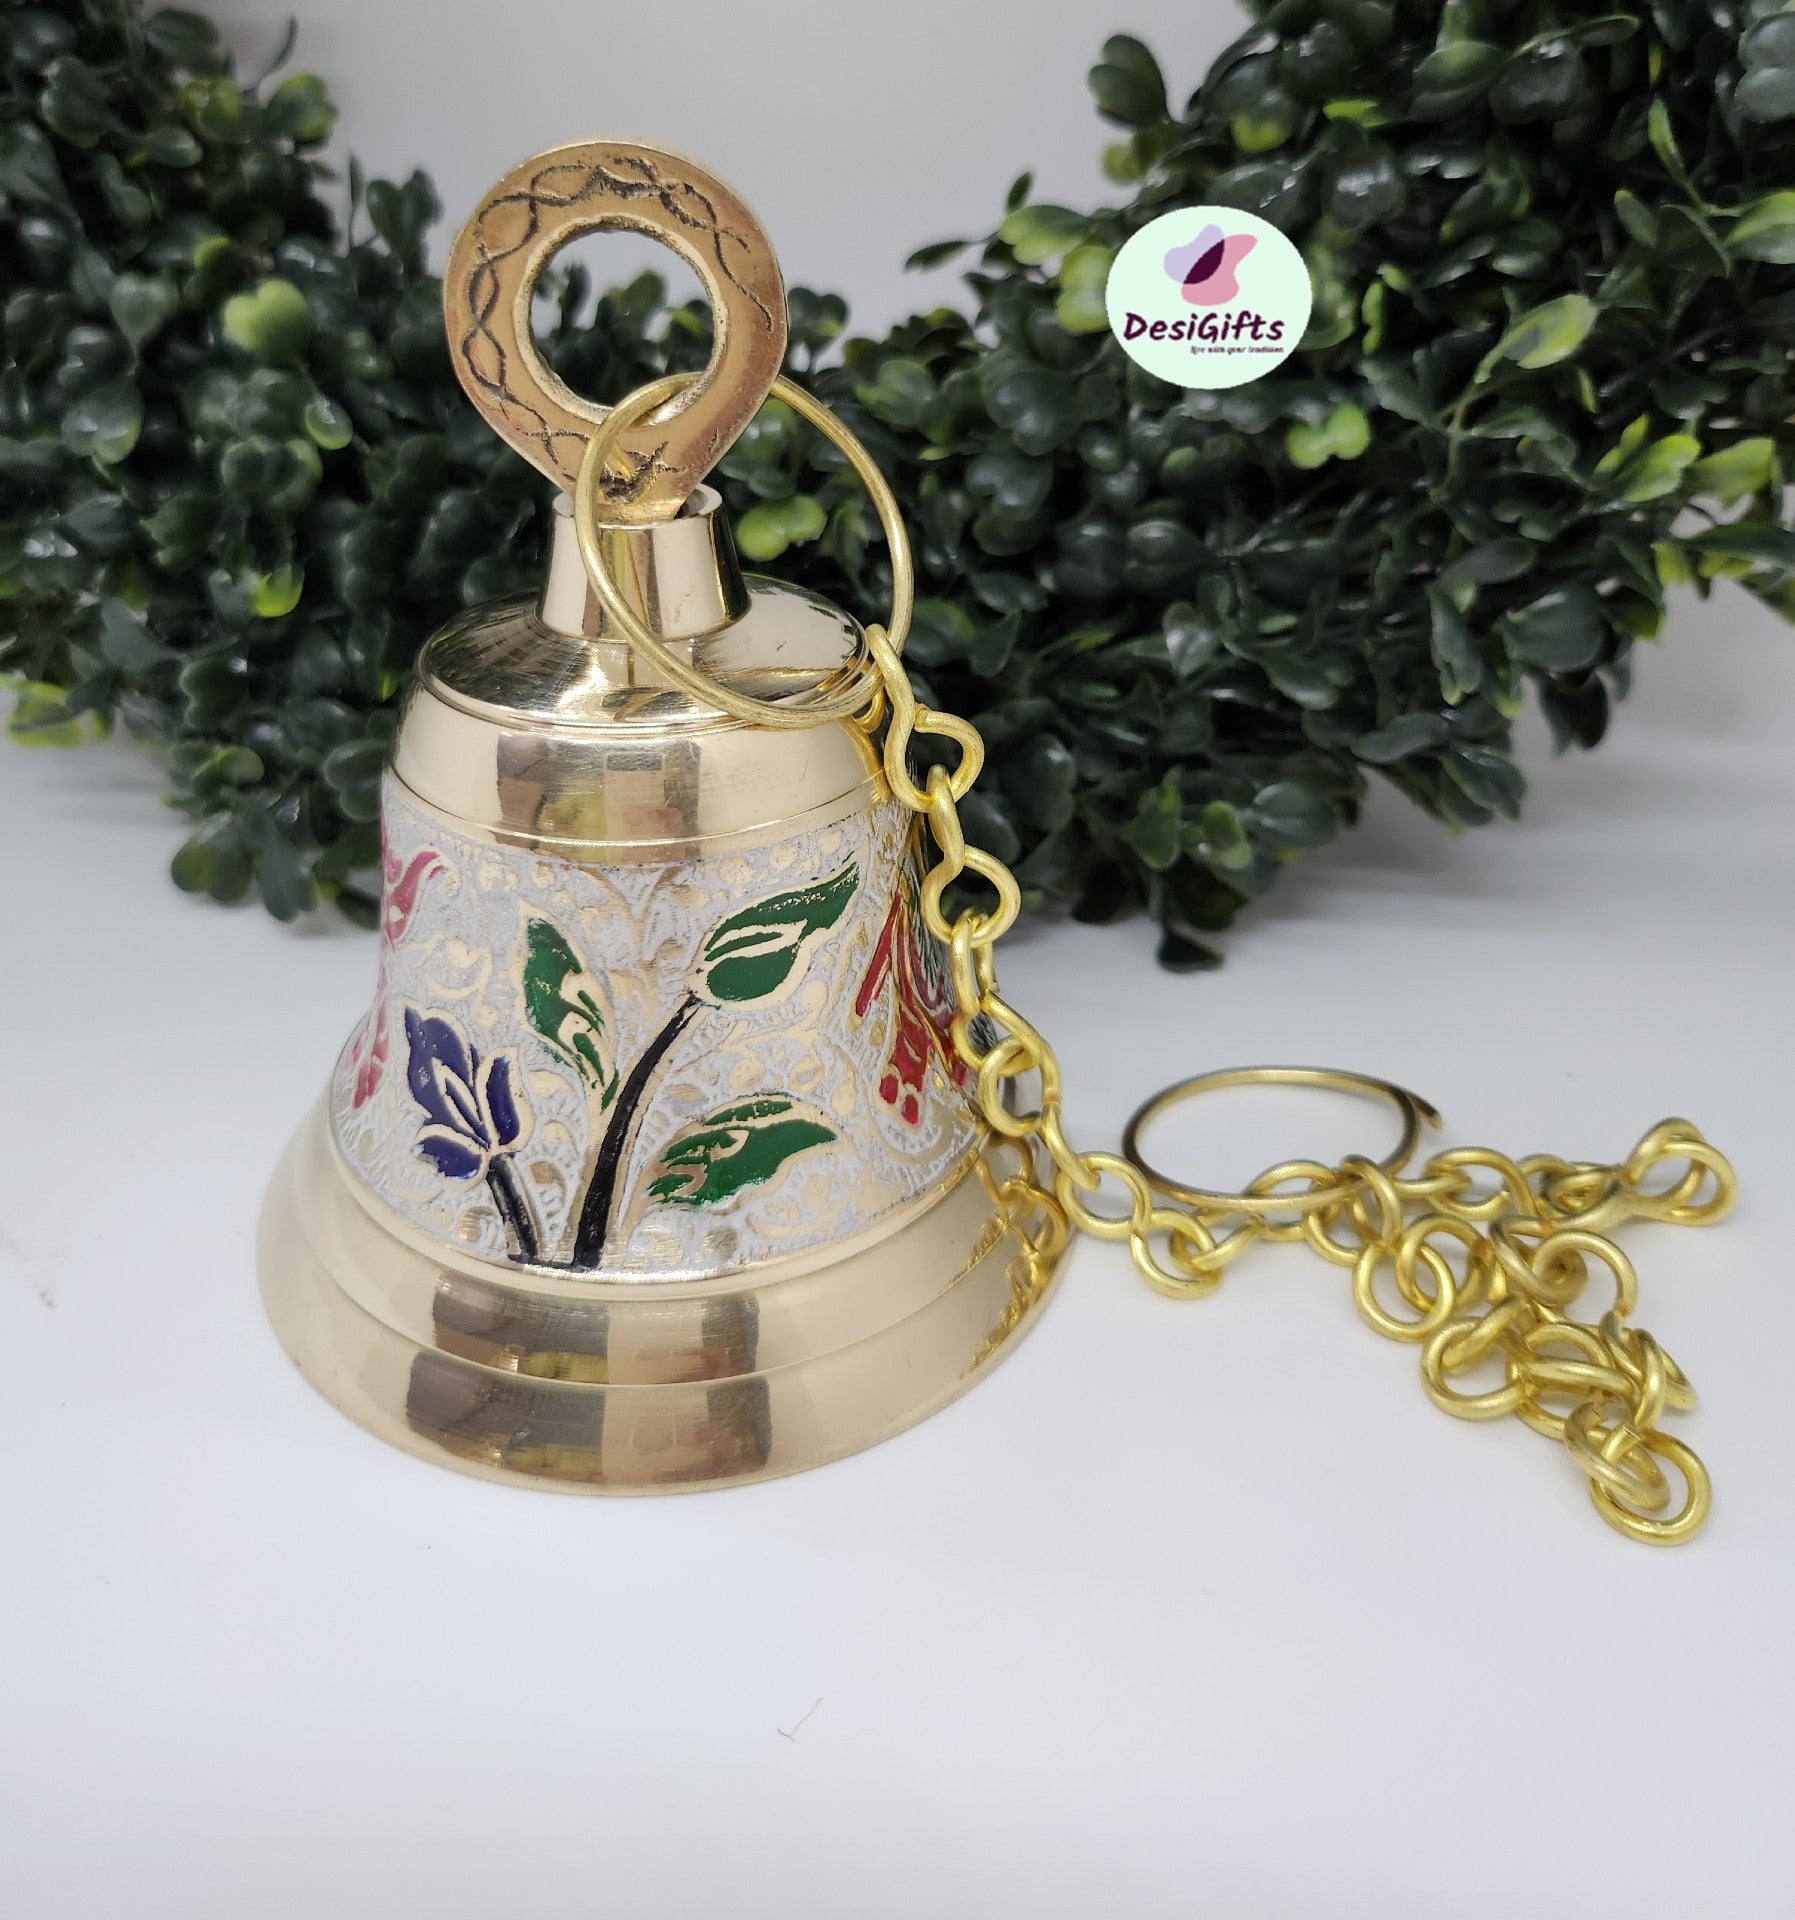 Indian Traditional Brass Hanging Bells With Chain For Home & Temple  Decoration